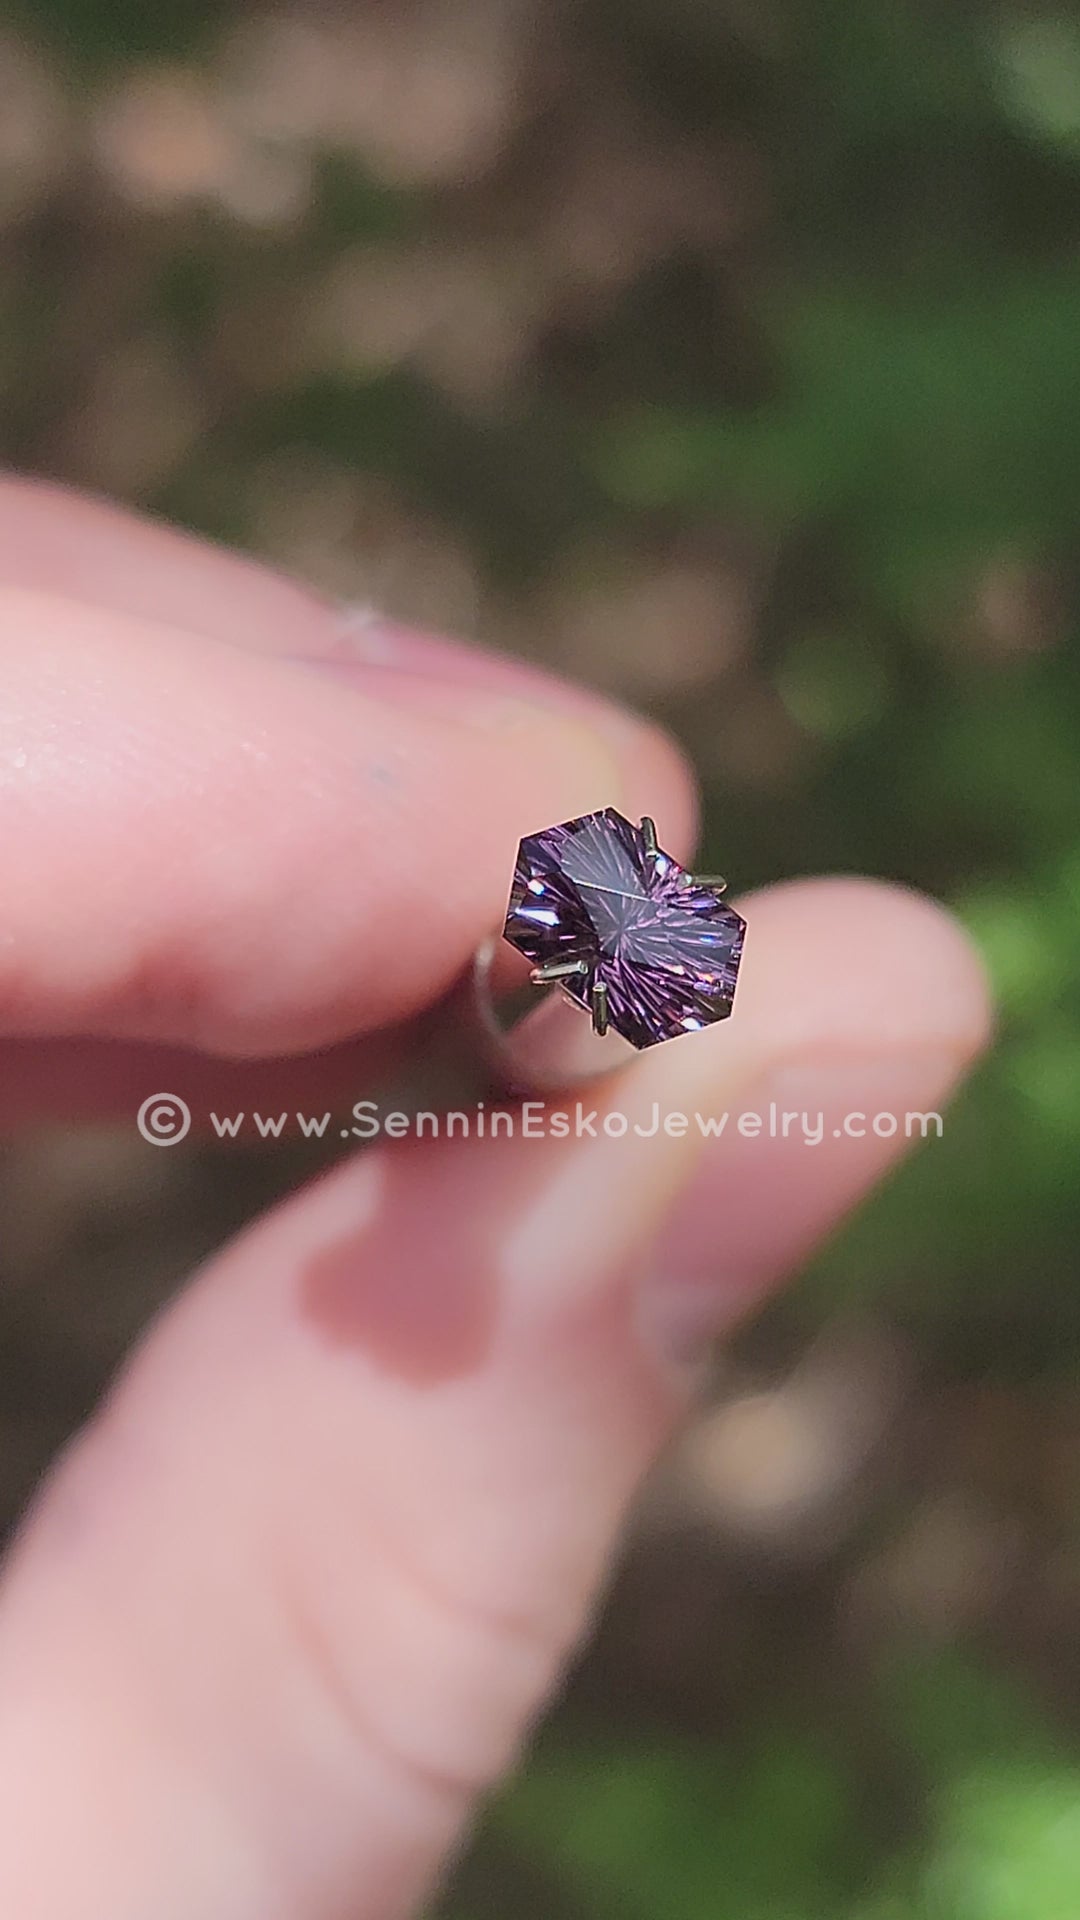 Hexagone spinelle lilas 1,4 carat - 8,4 x 5,2 mm, coupe fantaisie